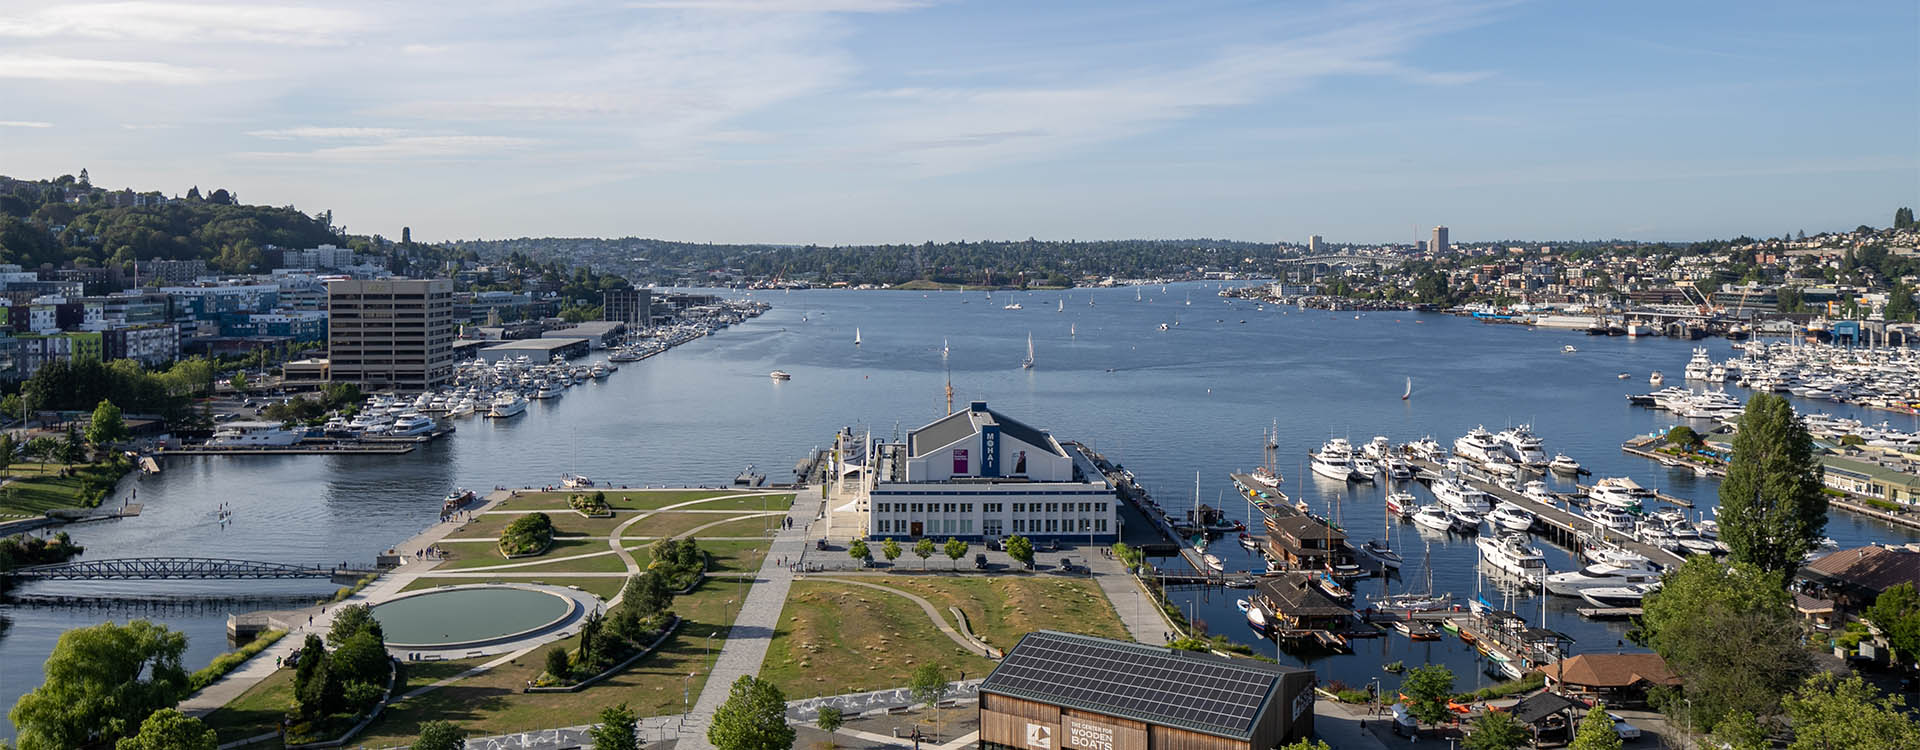 View of Lake Union from Helm rooftop deck